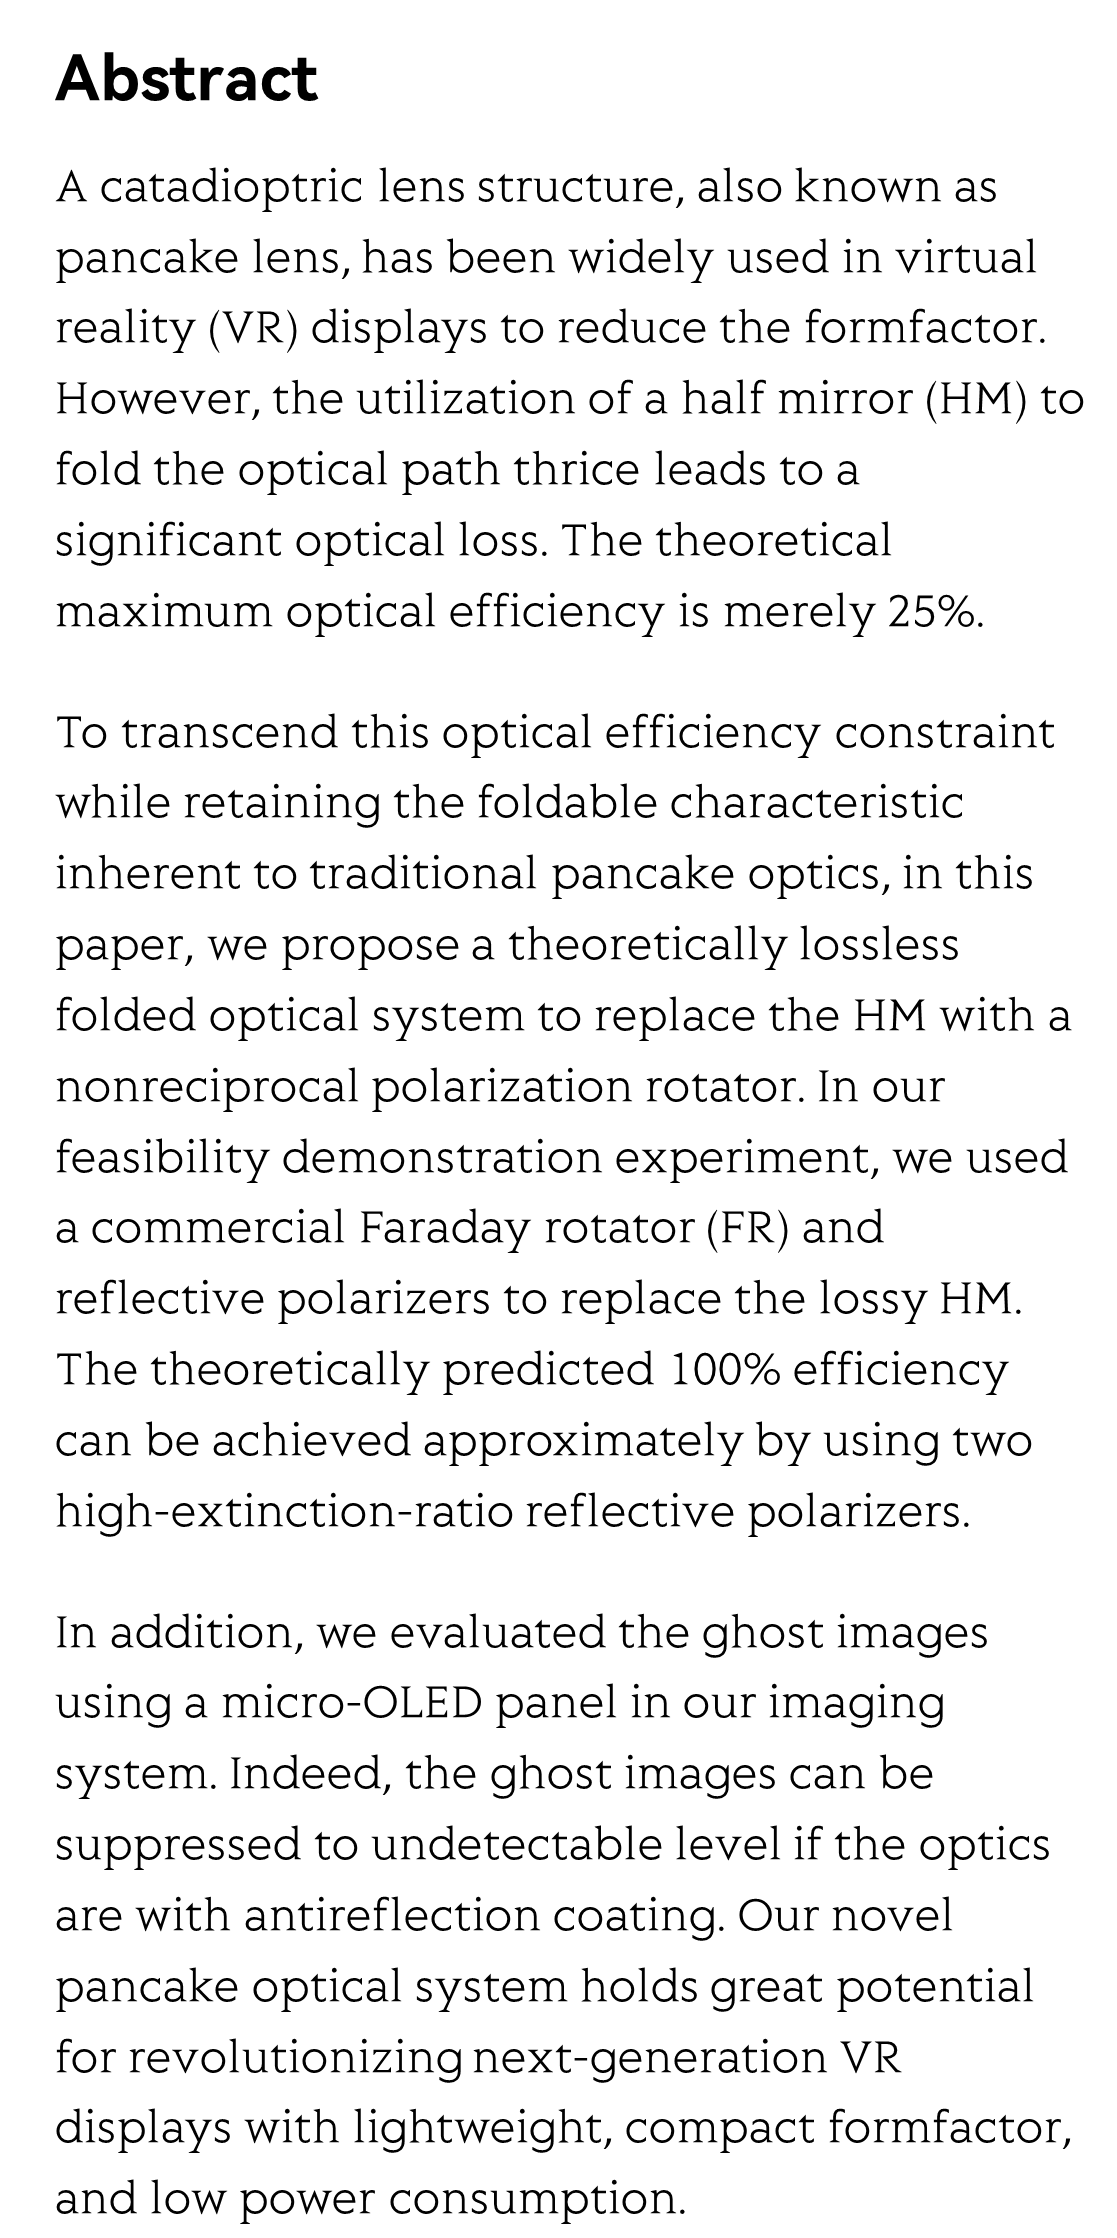 Breaking the optical efficiency limit of virtual reality with a nonreciprocal polarization rotator_2